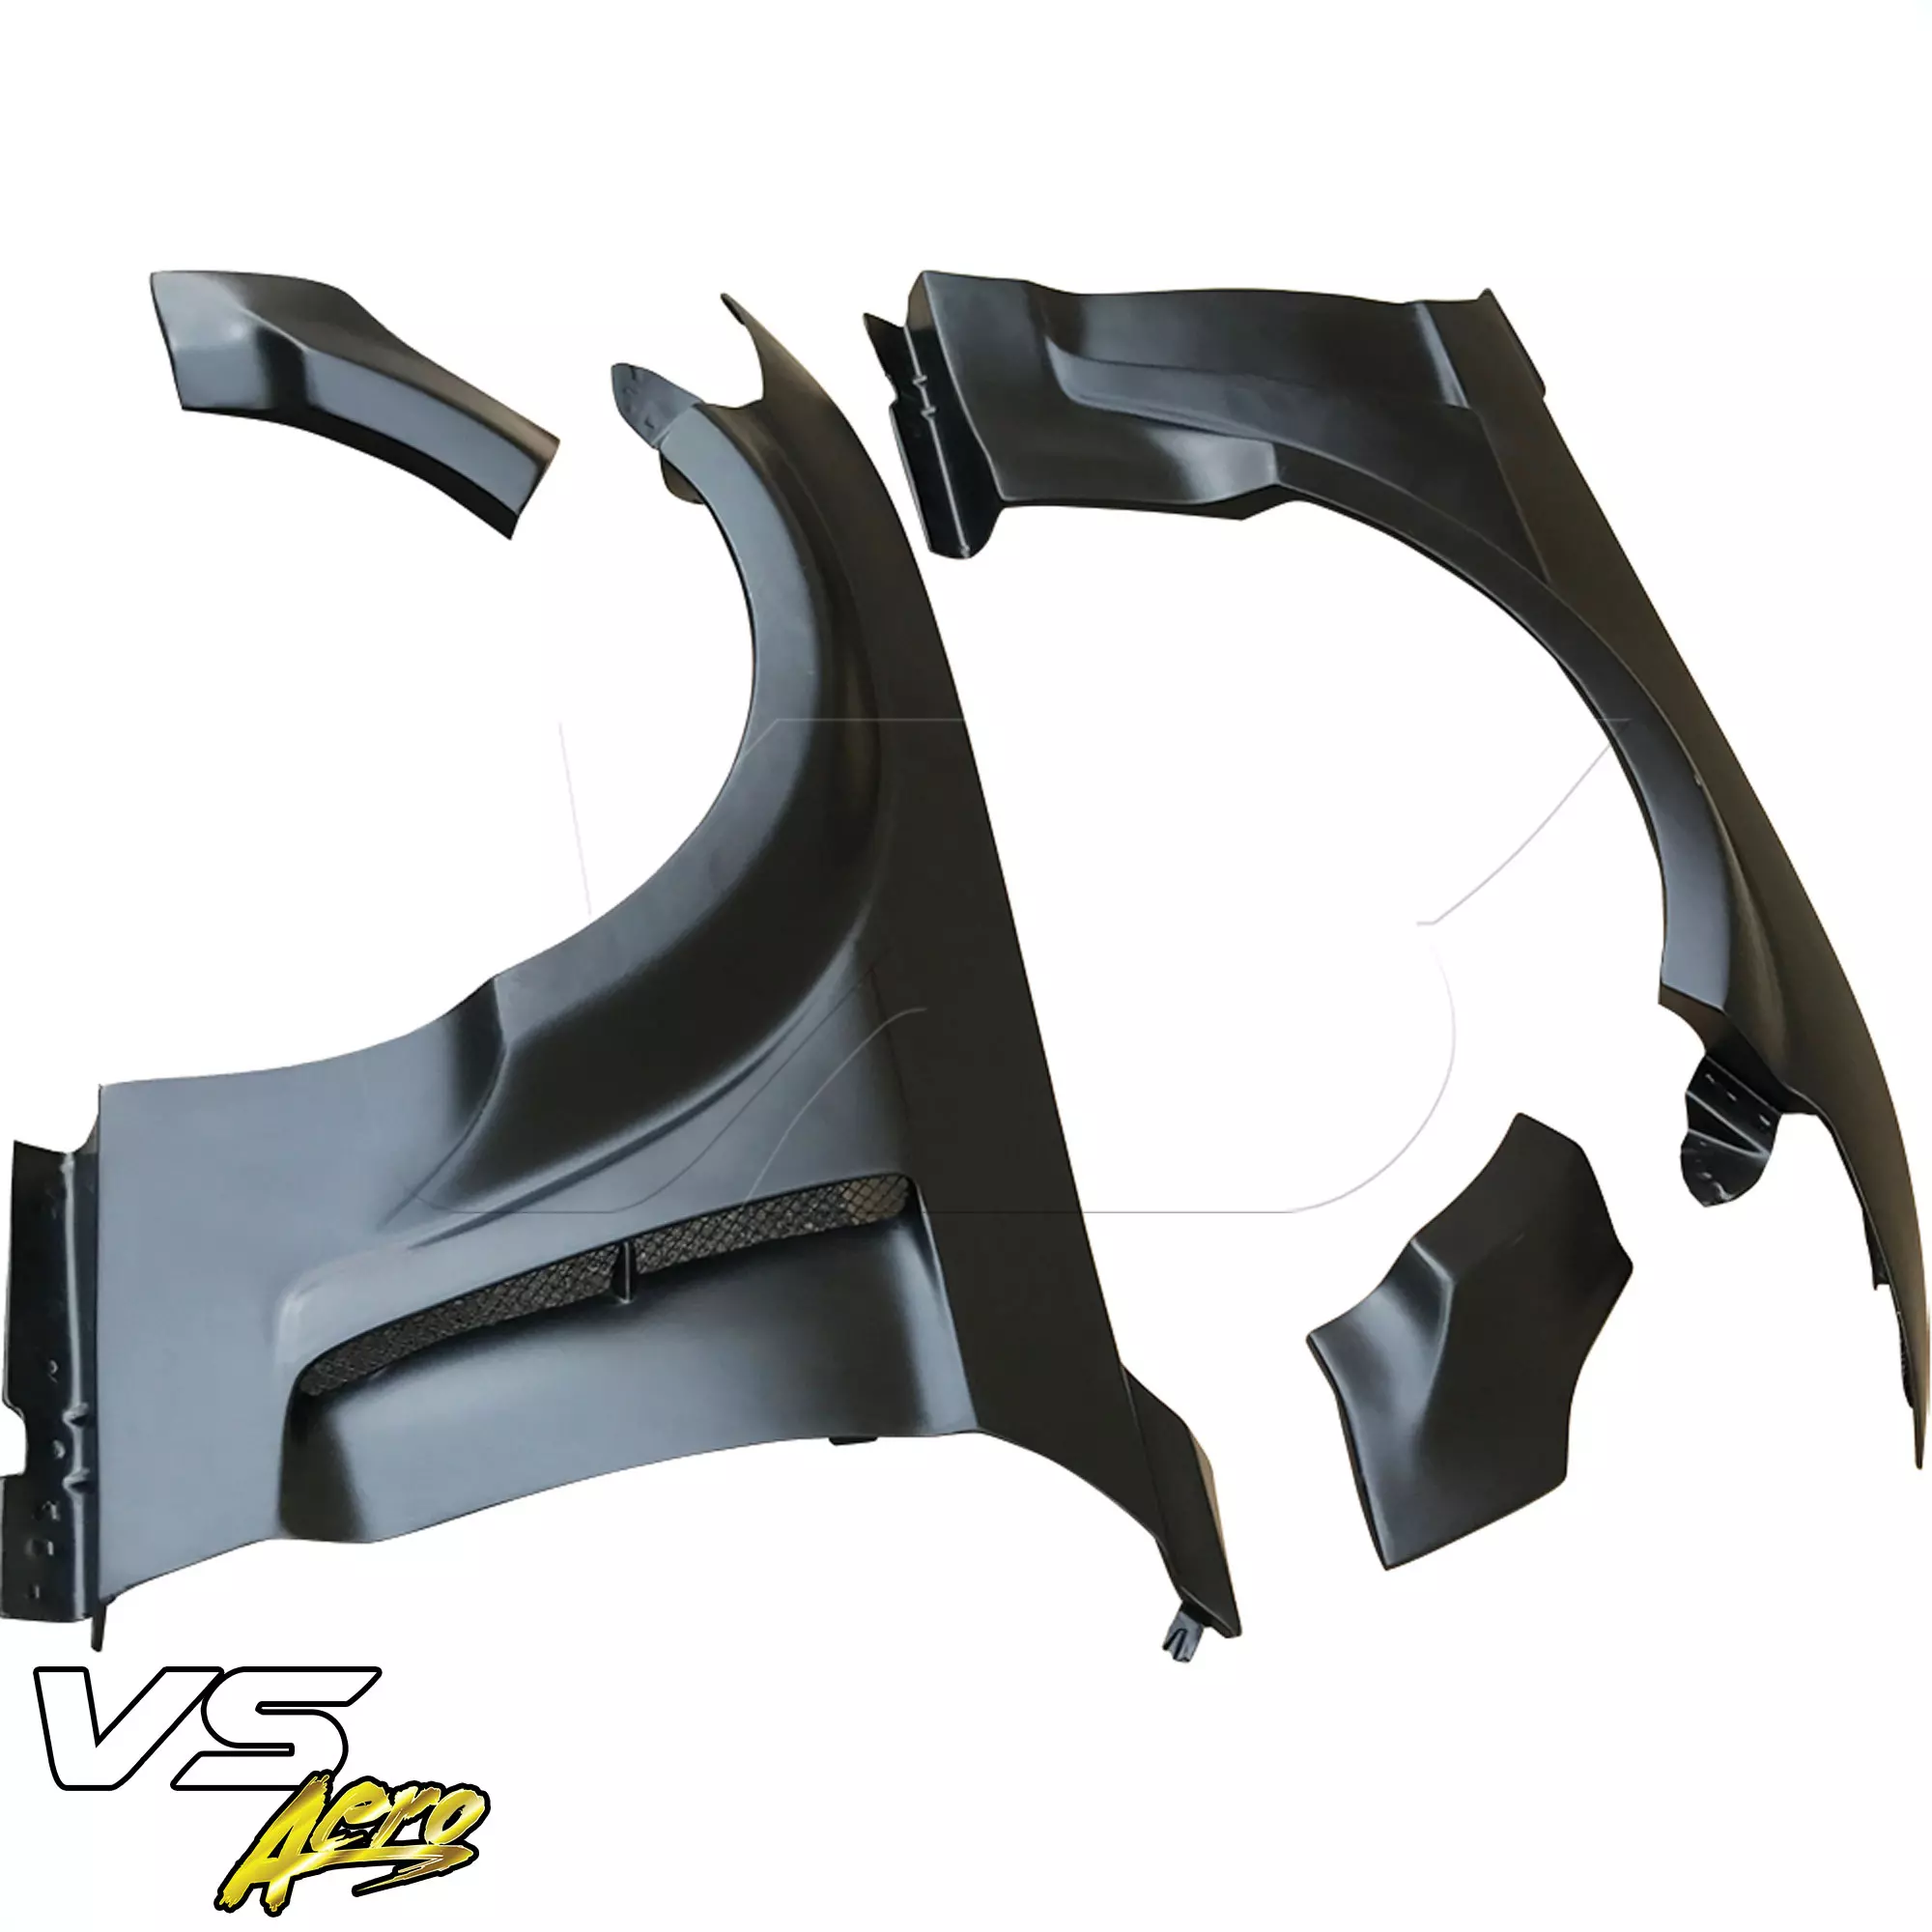 VSaero FRP KTOT Wide Body Fenders (front) > Ford Mustang 2015-2020 - Image 22